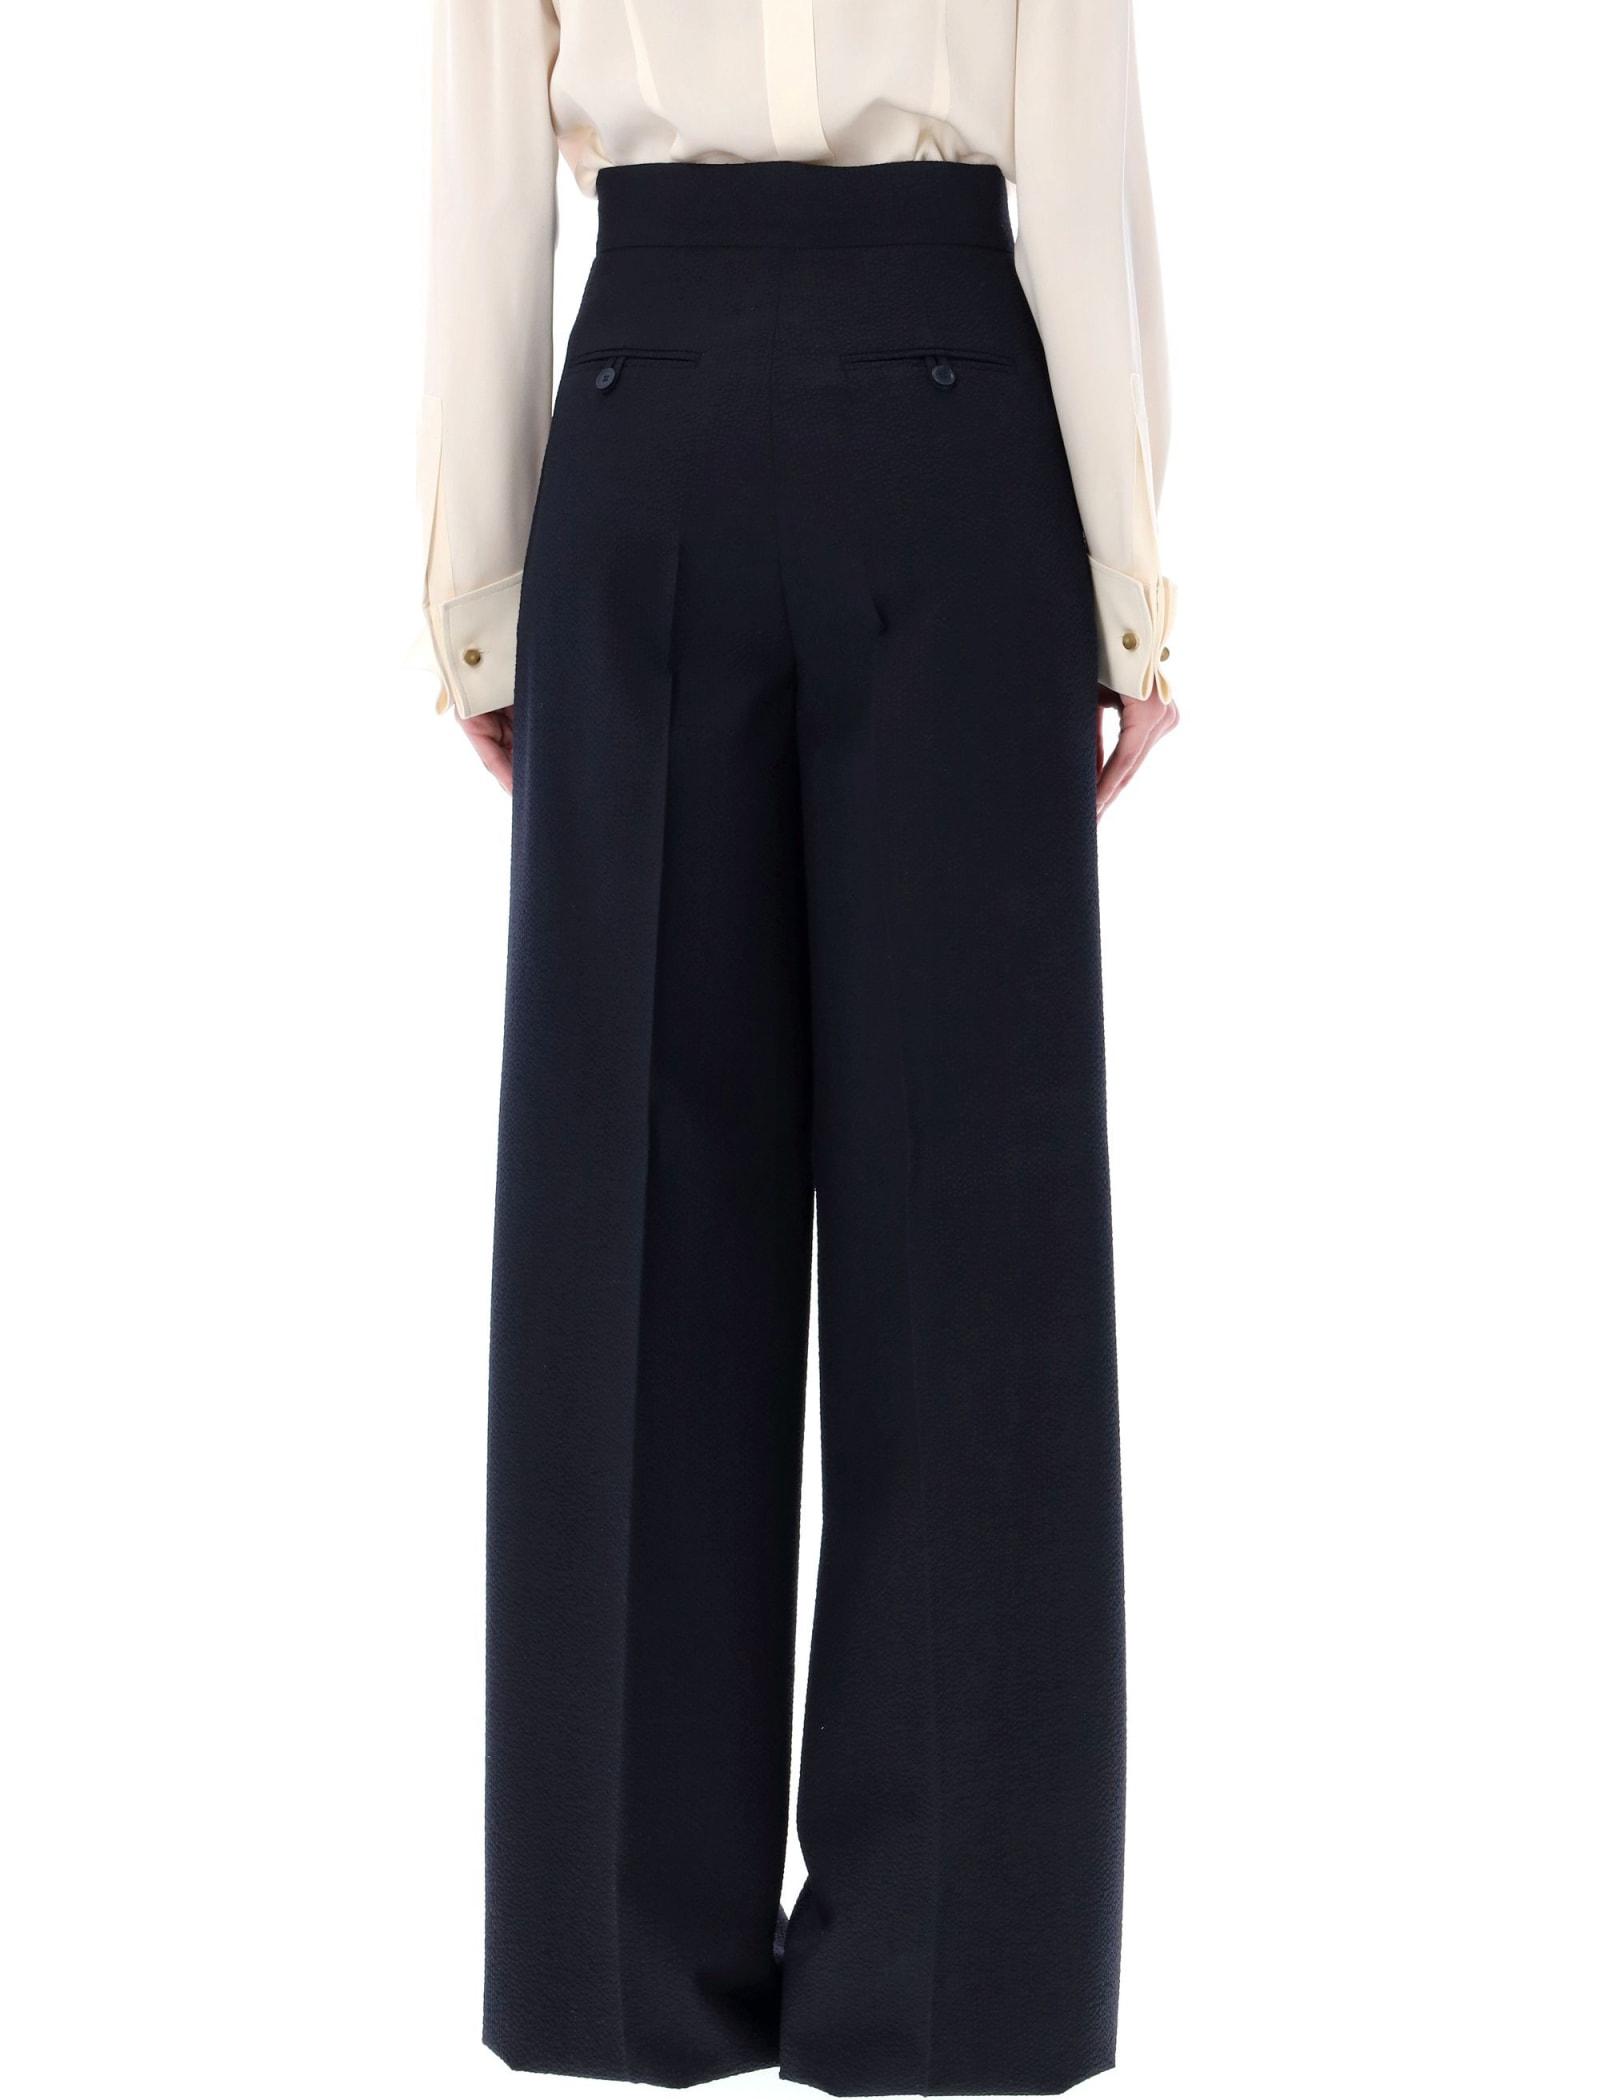 Ghisa Cady Trousers - Stylish and Comfortable Women's Pants | LOZURI